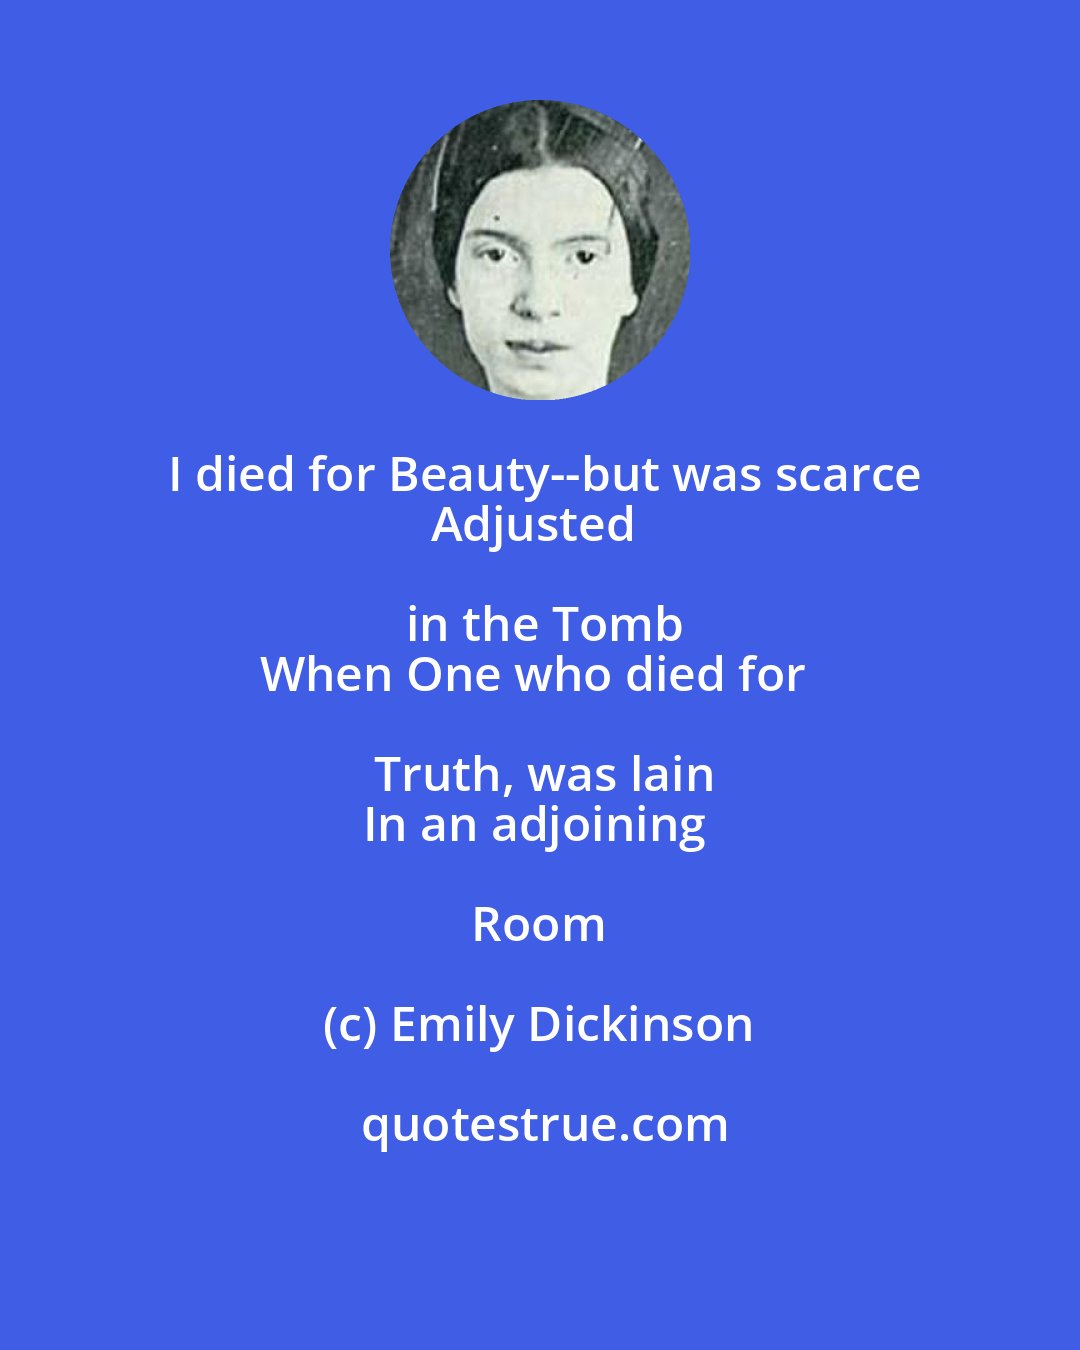 Emily Dickinson: I died for Beauty--but was scarce
Adjusted in the Tomb
When One who died for Truth, was lain
In an adjoining Room